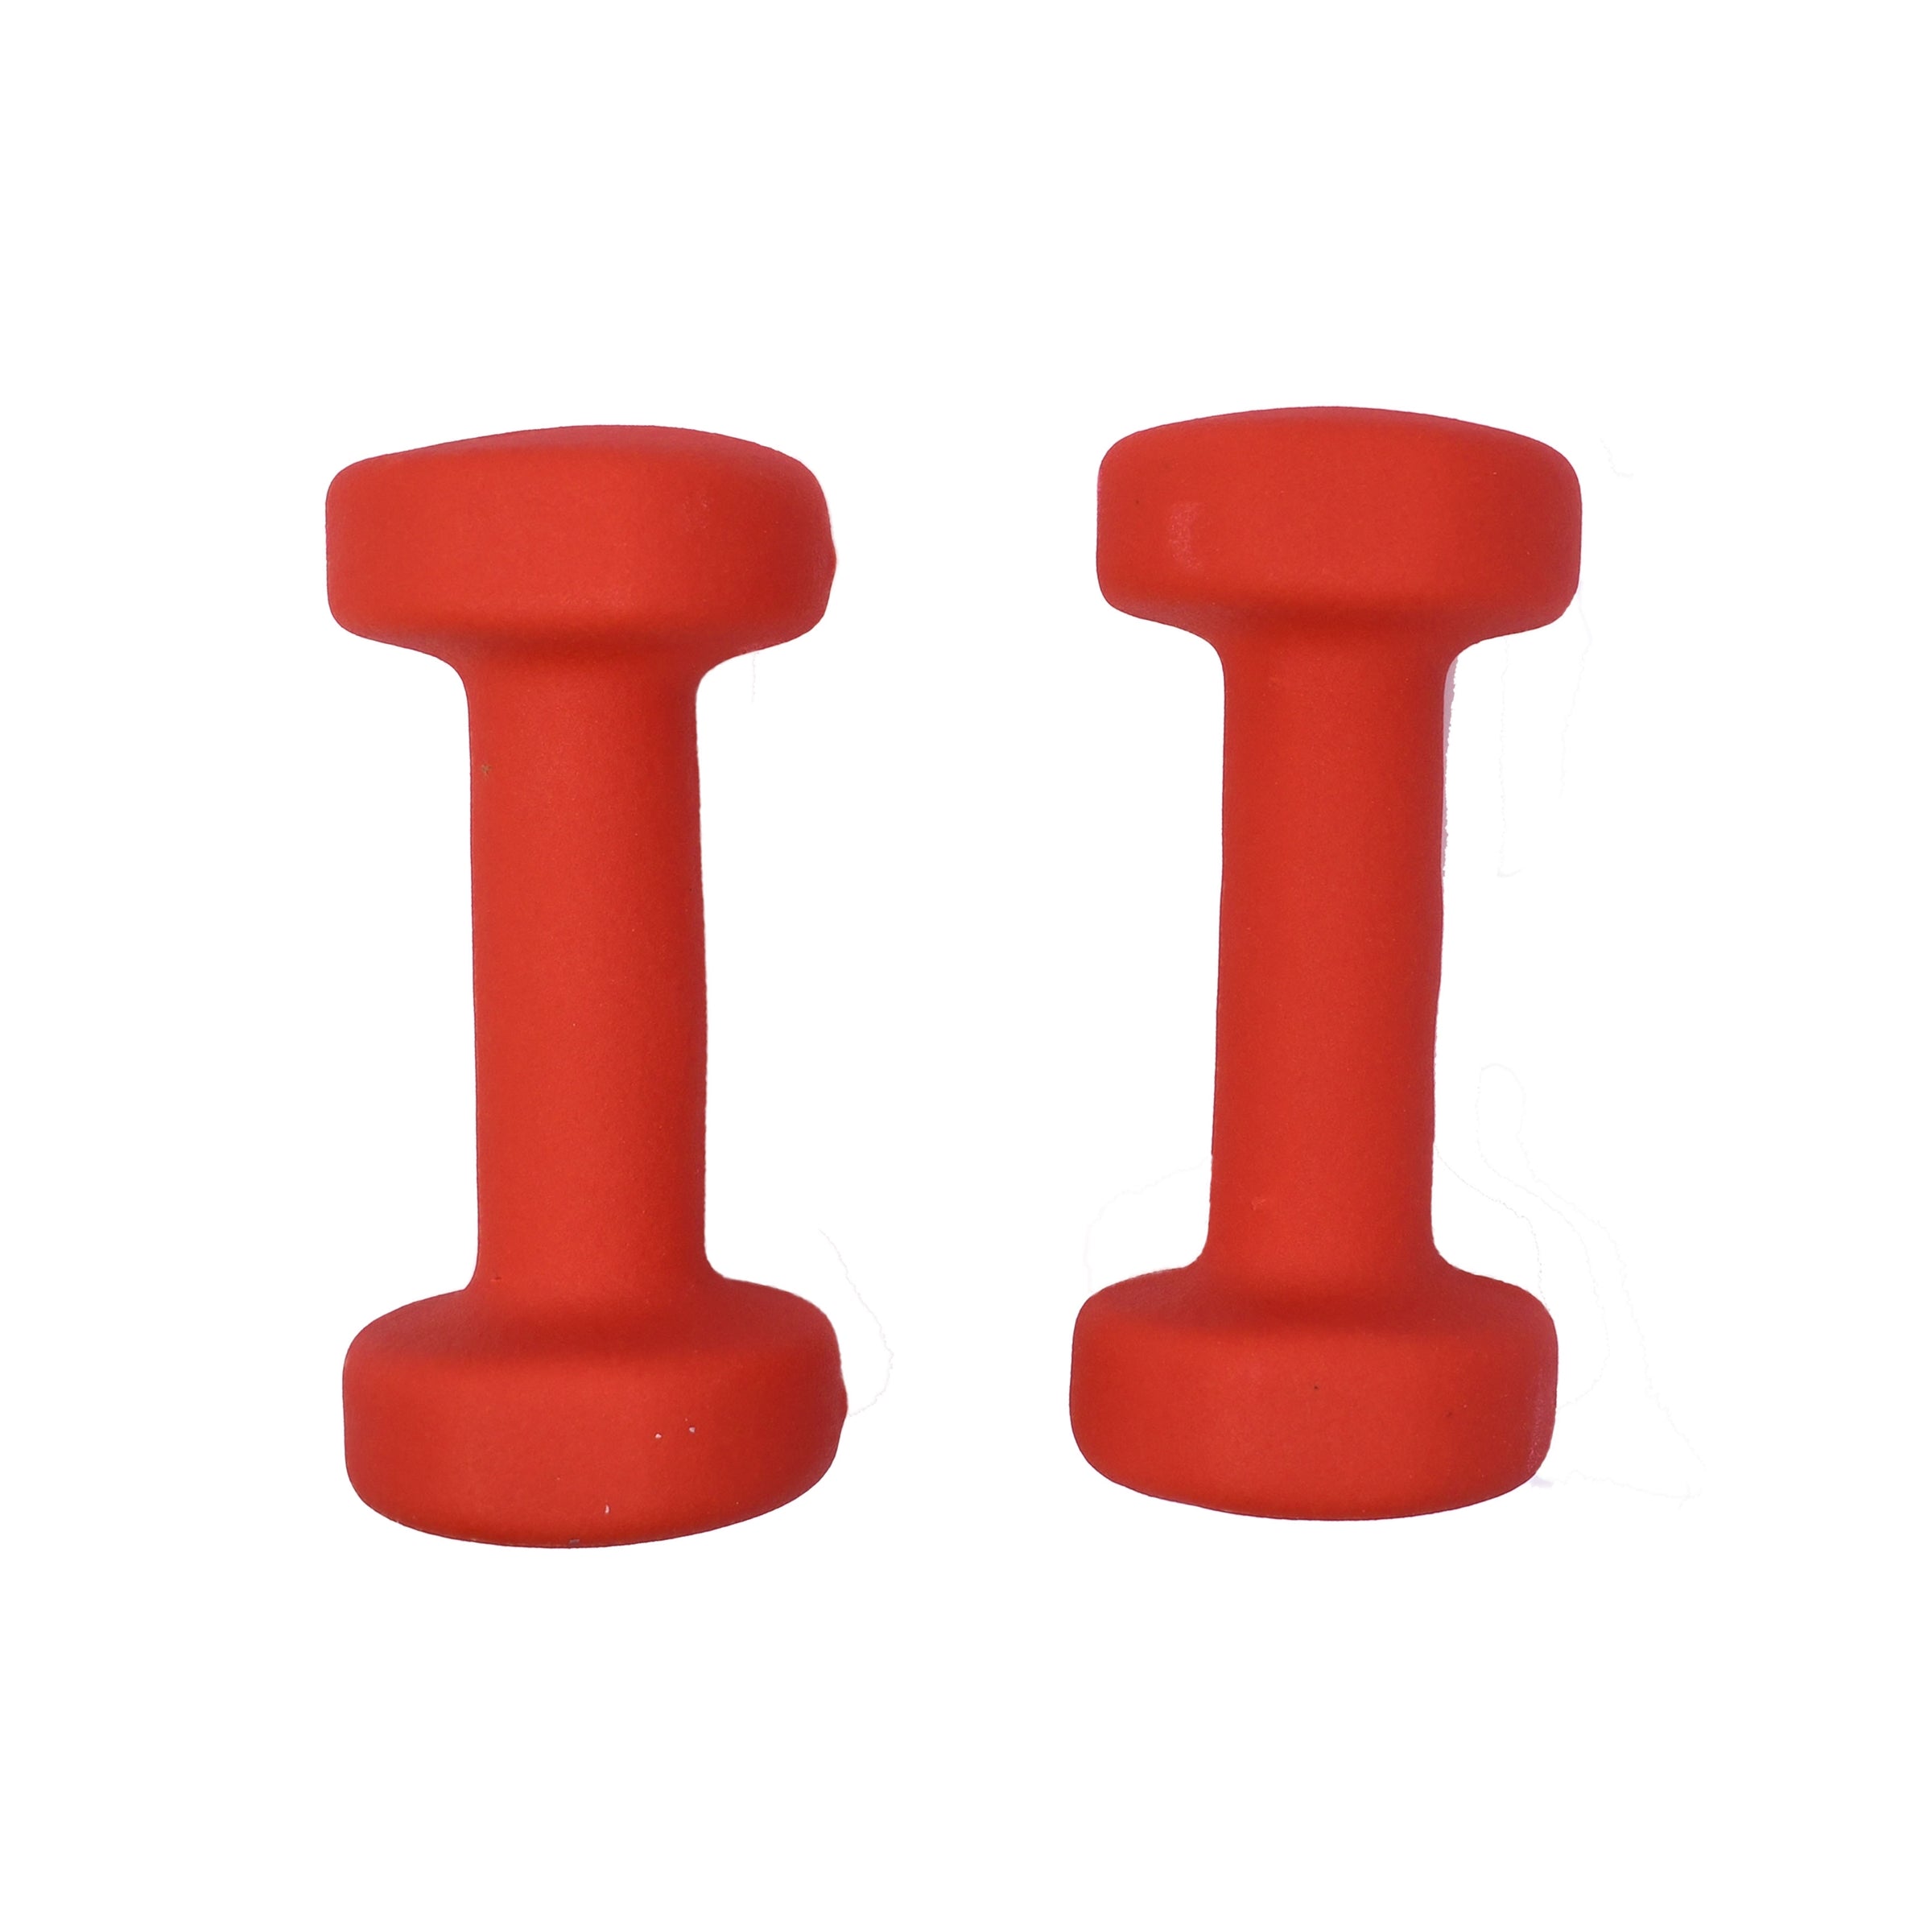 Non-Slip Hexagonal Shaped Free Weight Dumbbells Red - Set of 2